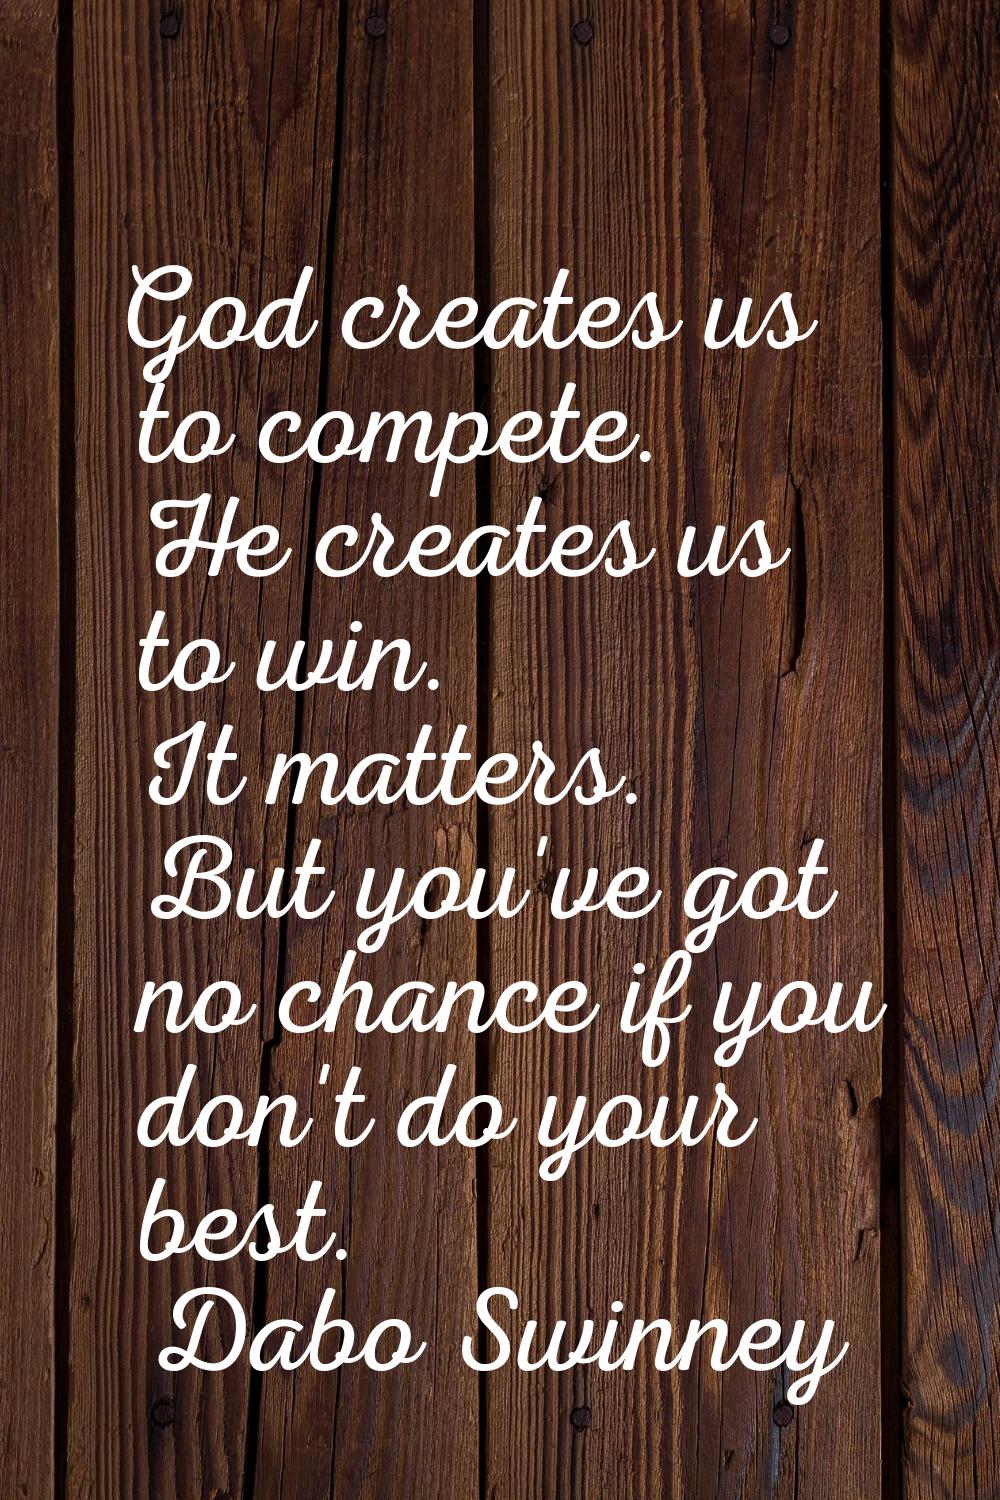 God creates us to compete. He creates us to win. It matters. But you've got no chance if you don't 